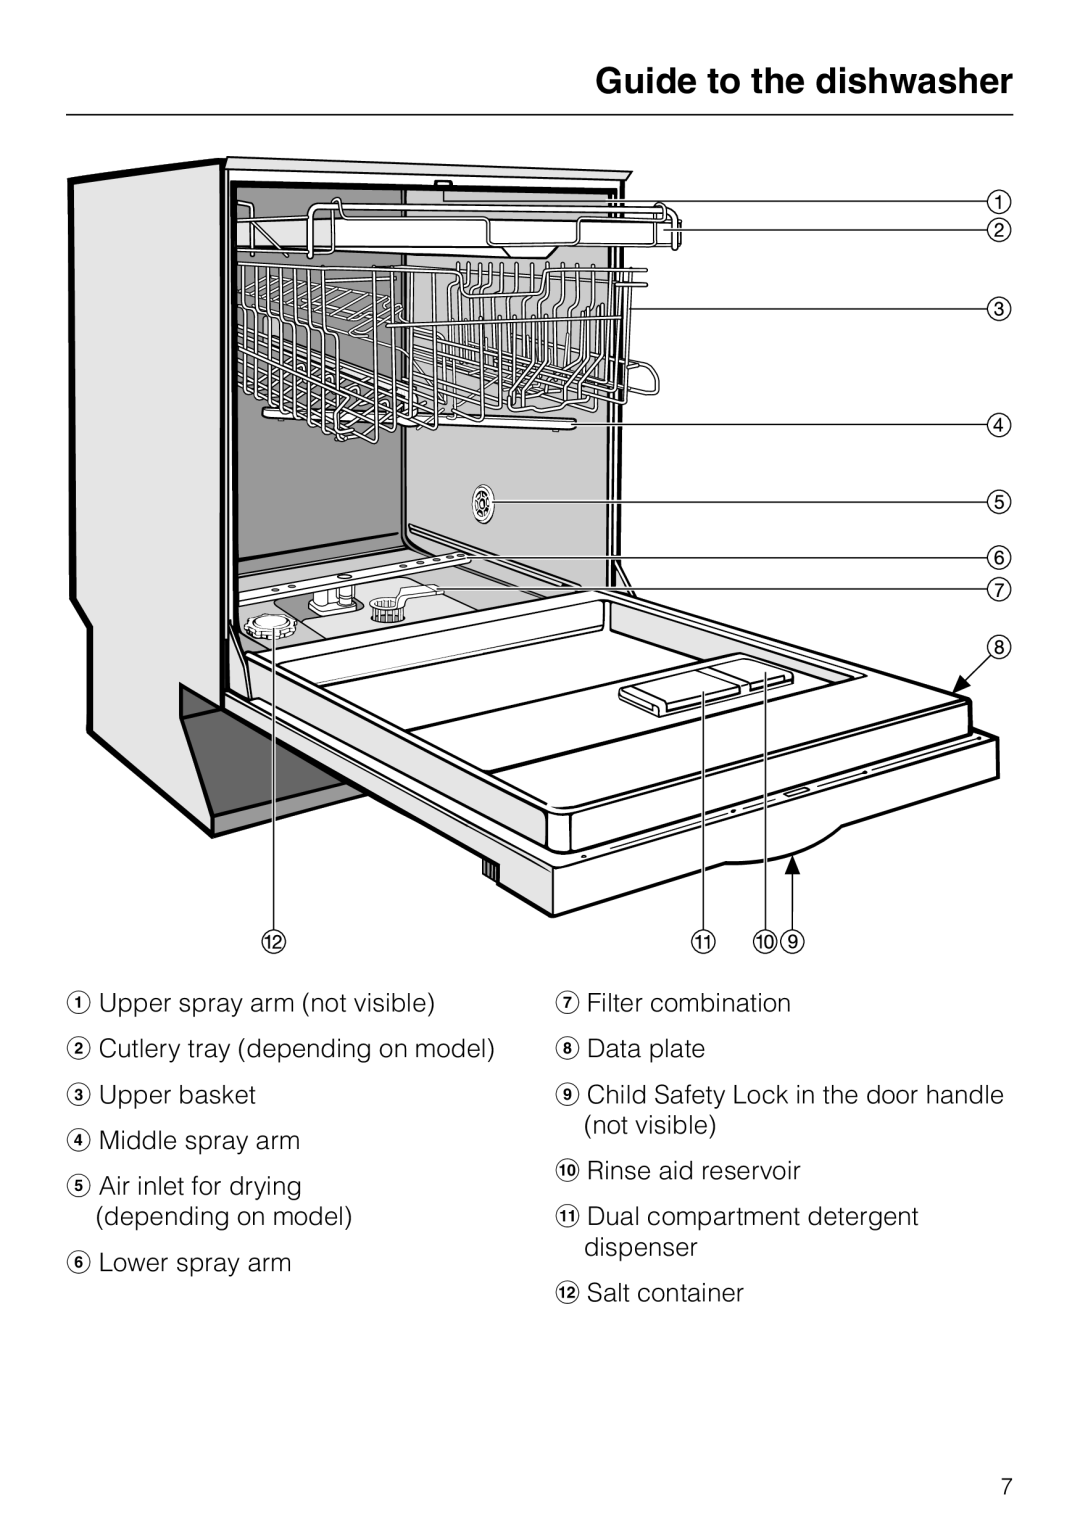 Miele G 2430, G 2420 manual Guide to the dishwasher 